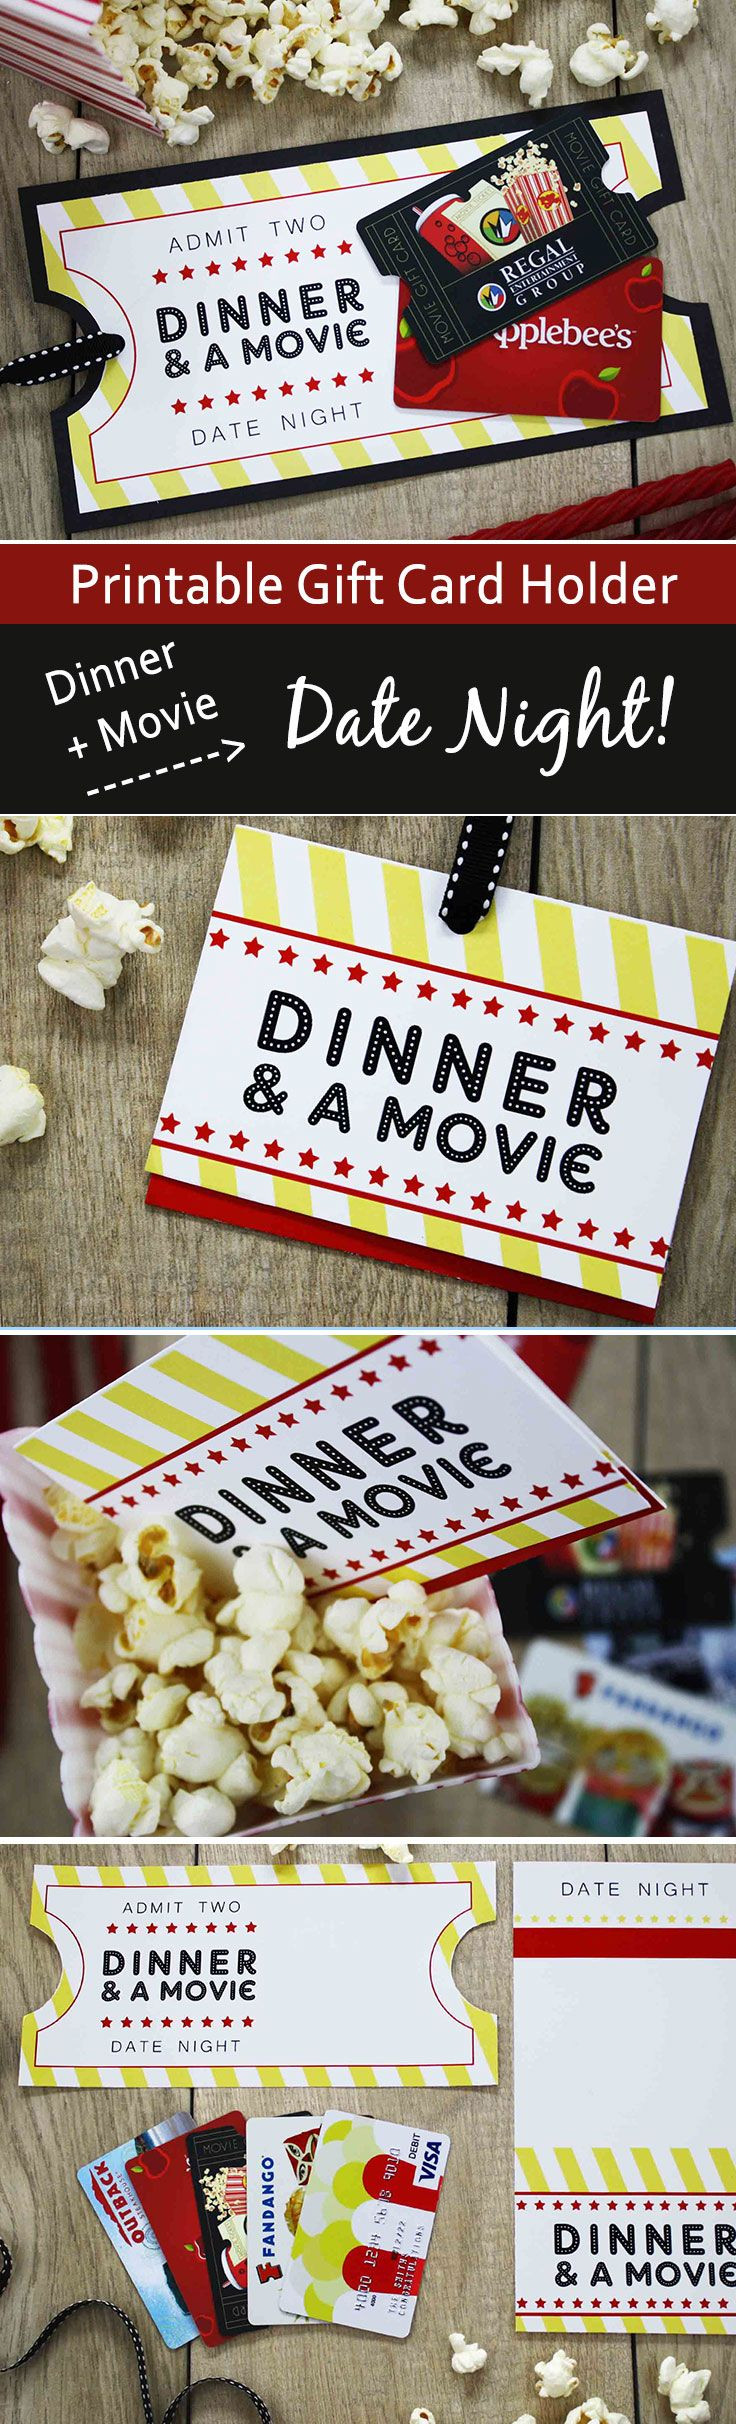 Movie Gift Card Basket Ideas
 Free Printable Give DATE NIGHT for a Wedding Gift